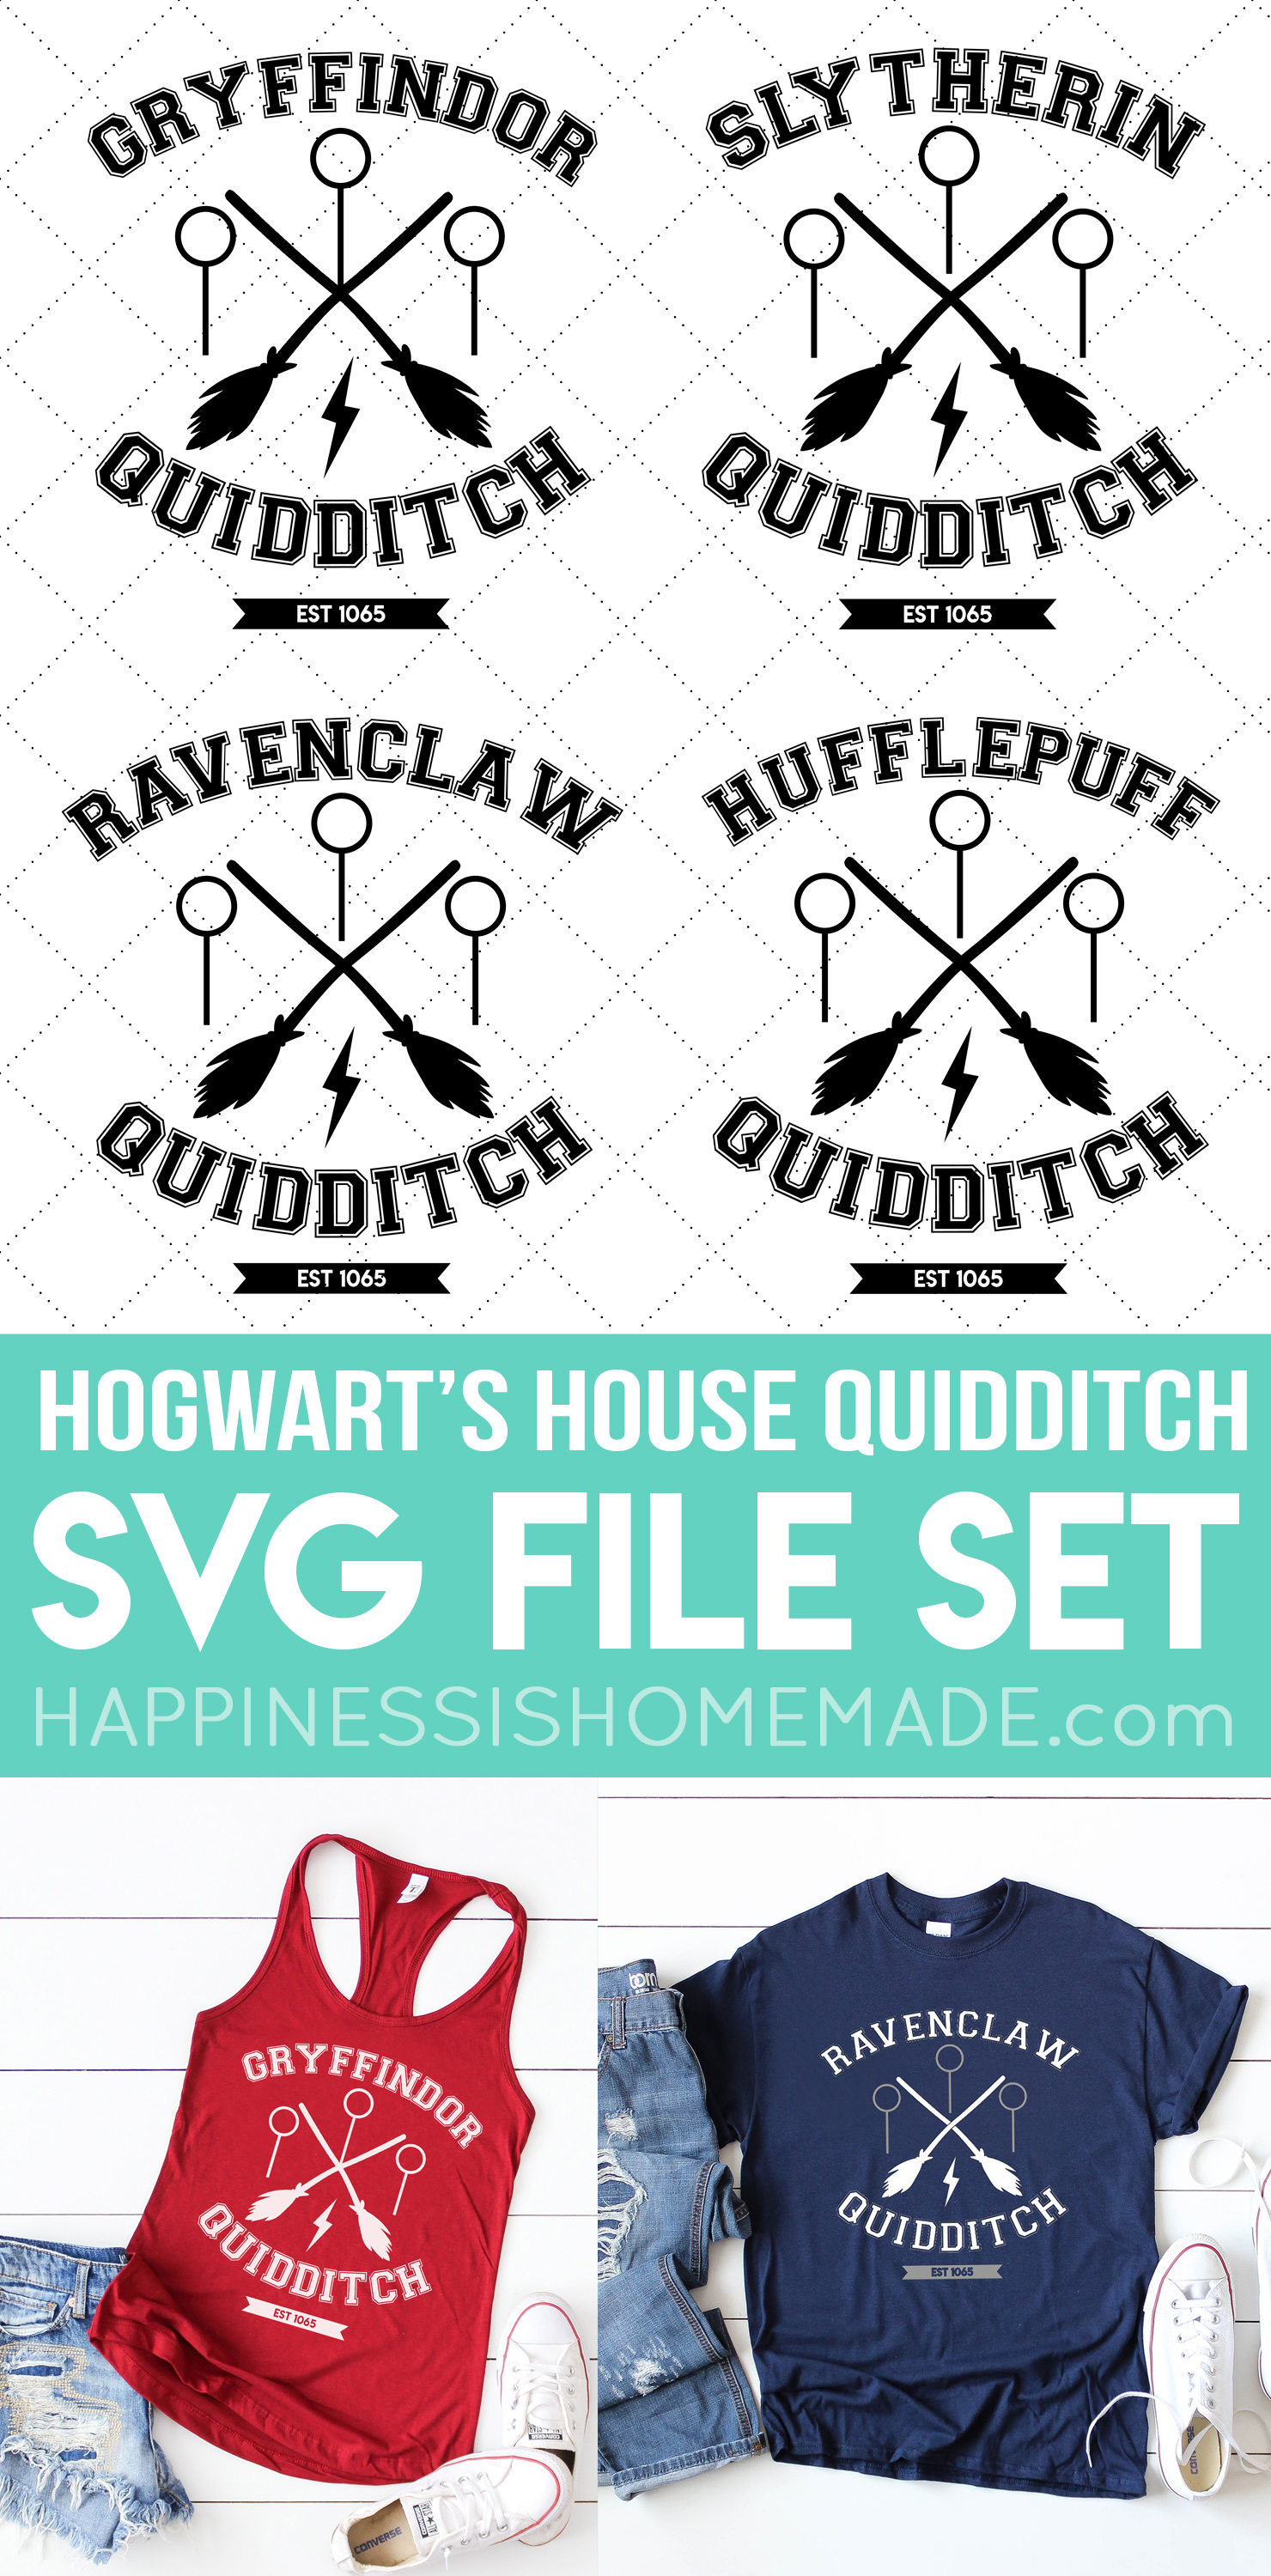 Ravenclaw Quidditch Shirt + FREE SVG File - Happiness is ...